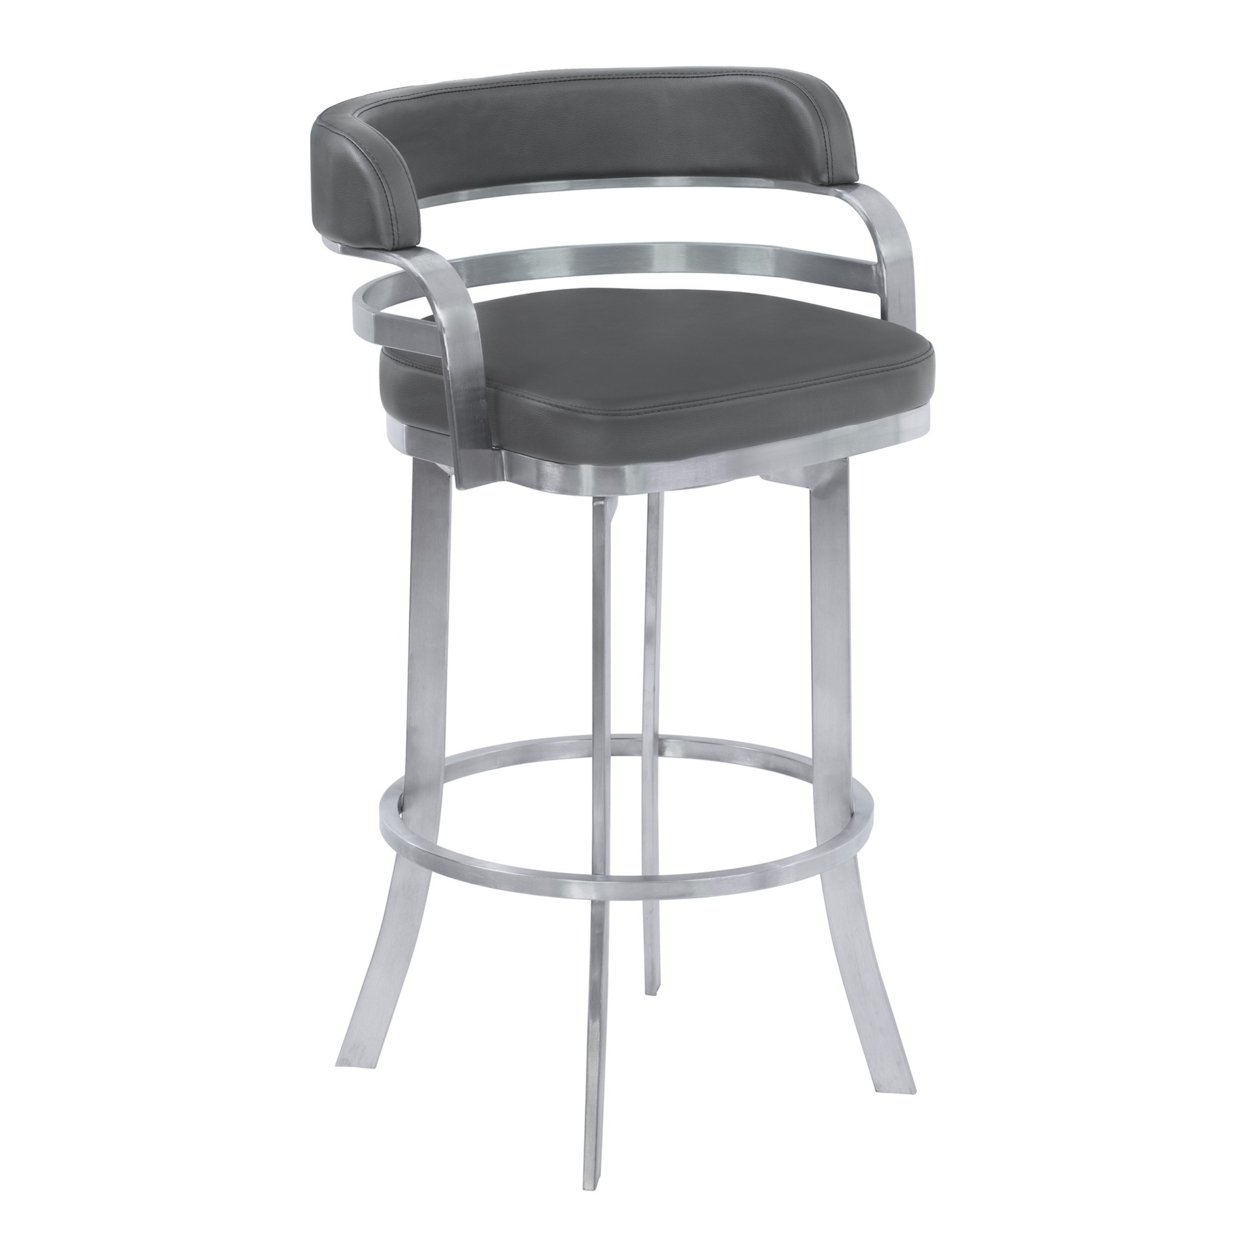 Metal Frame Barstool With Curved Leatherette Seating, Gray And Silver- Saltoro Sherpi